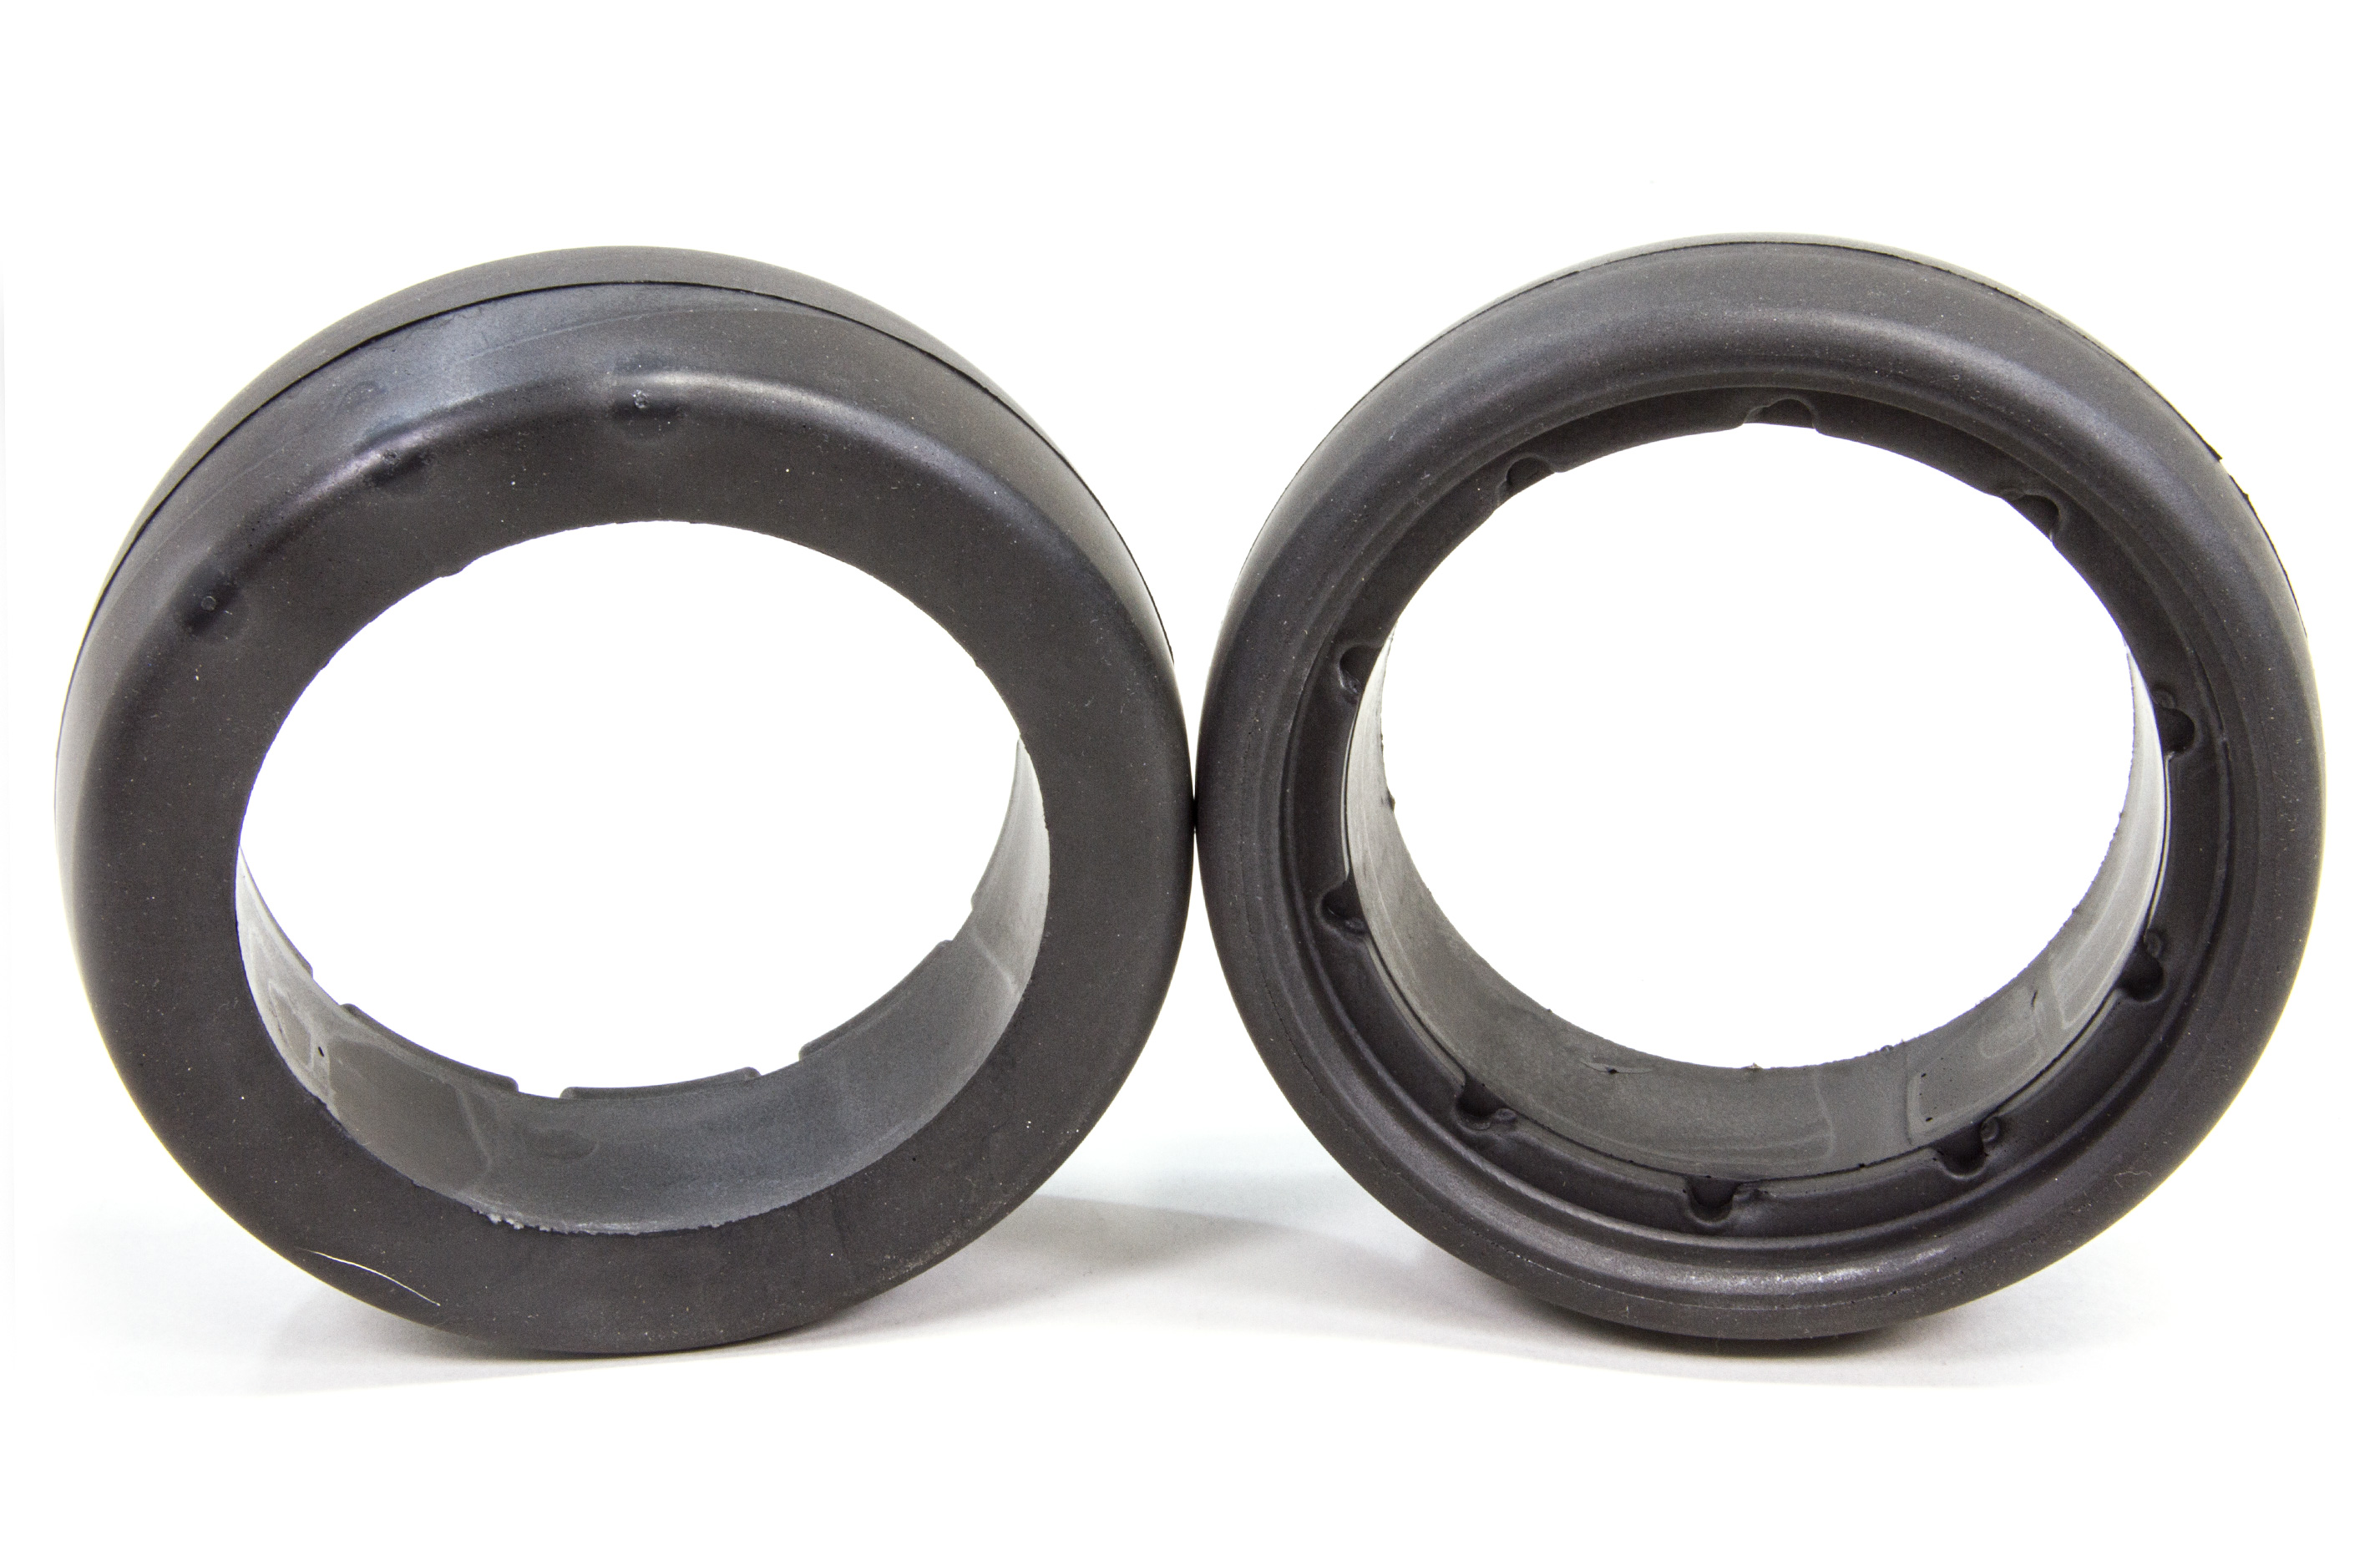 LOSB 7241 Tire Inserts front/rear, Soft 5T